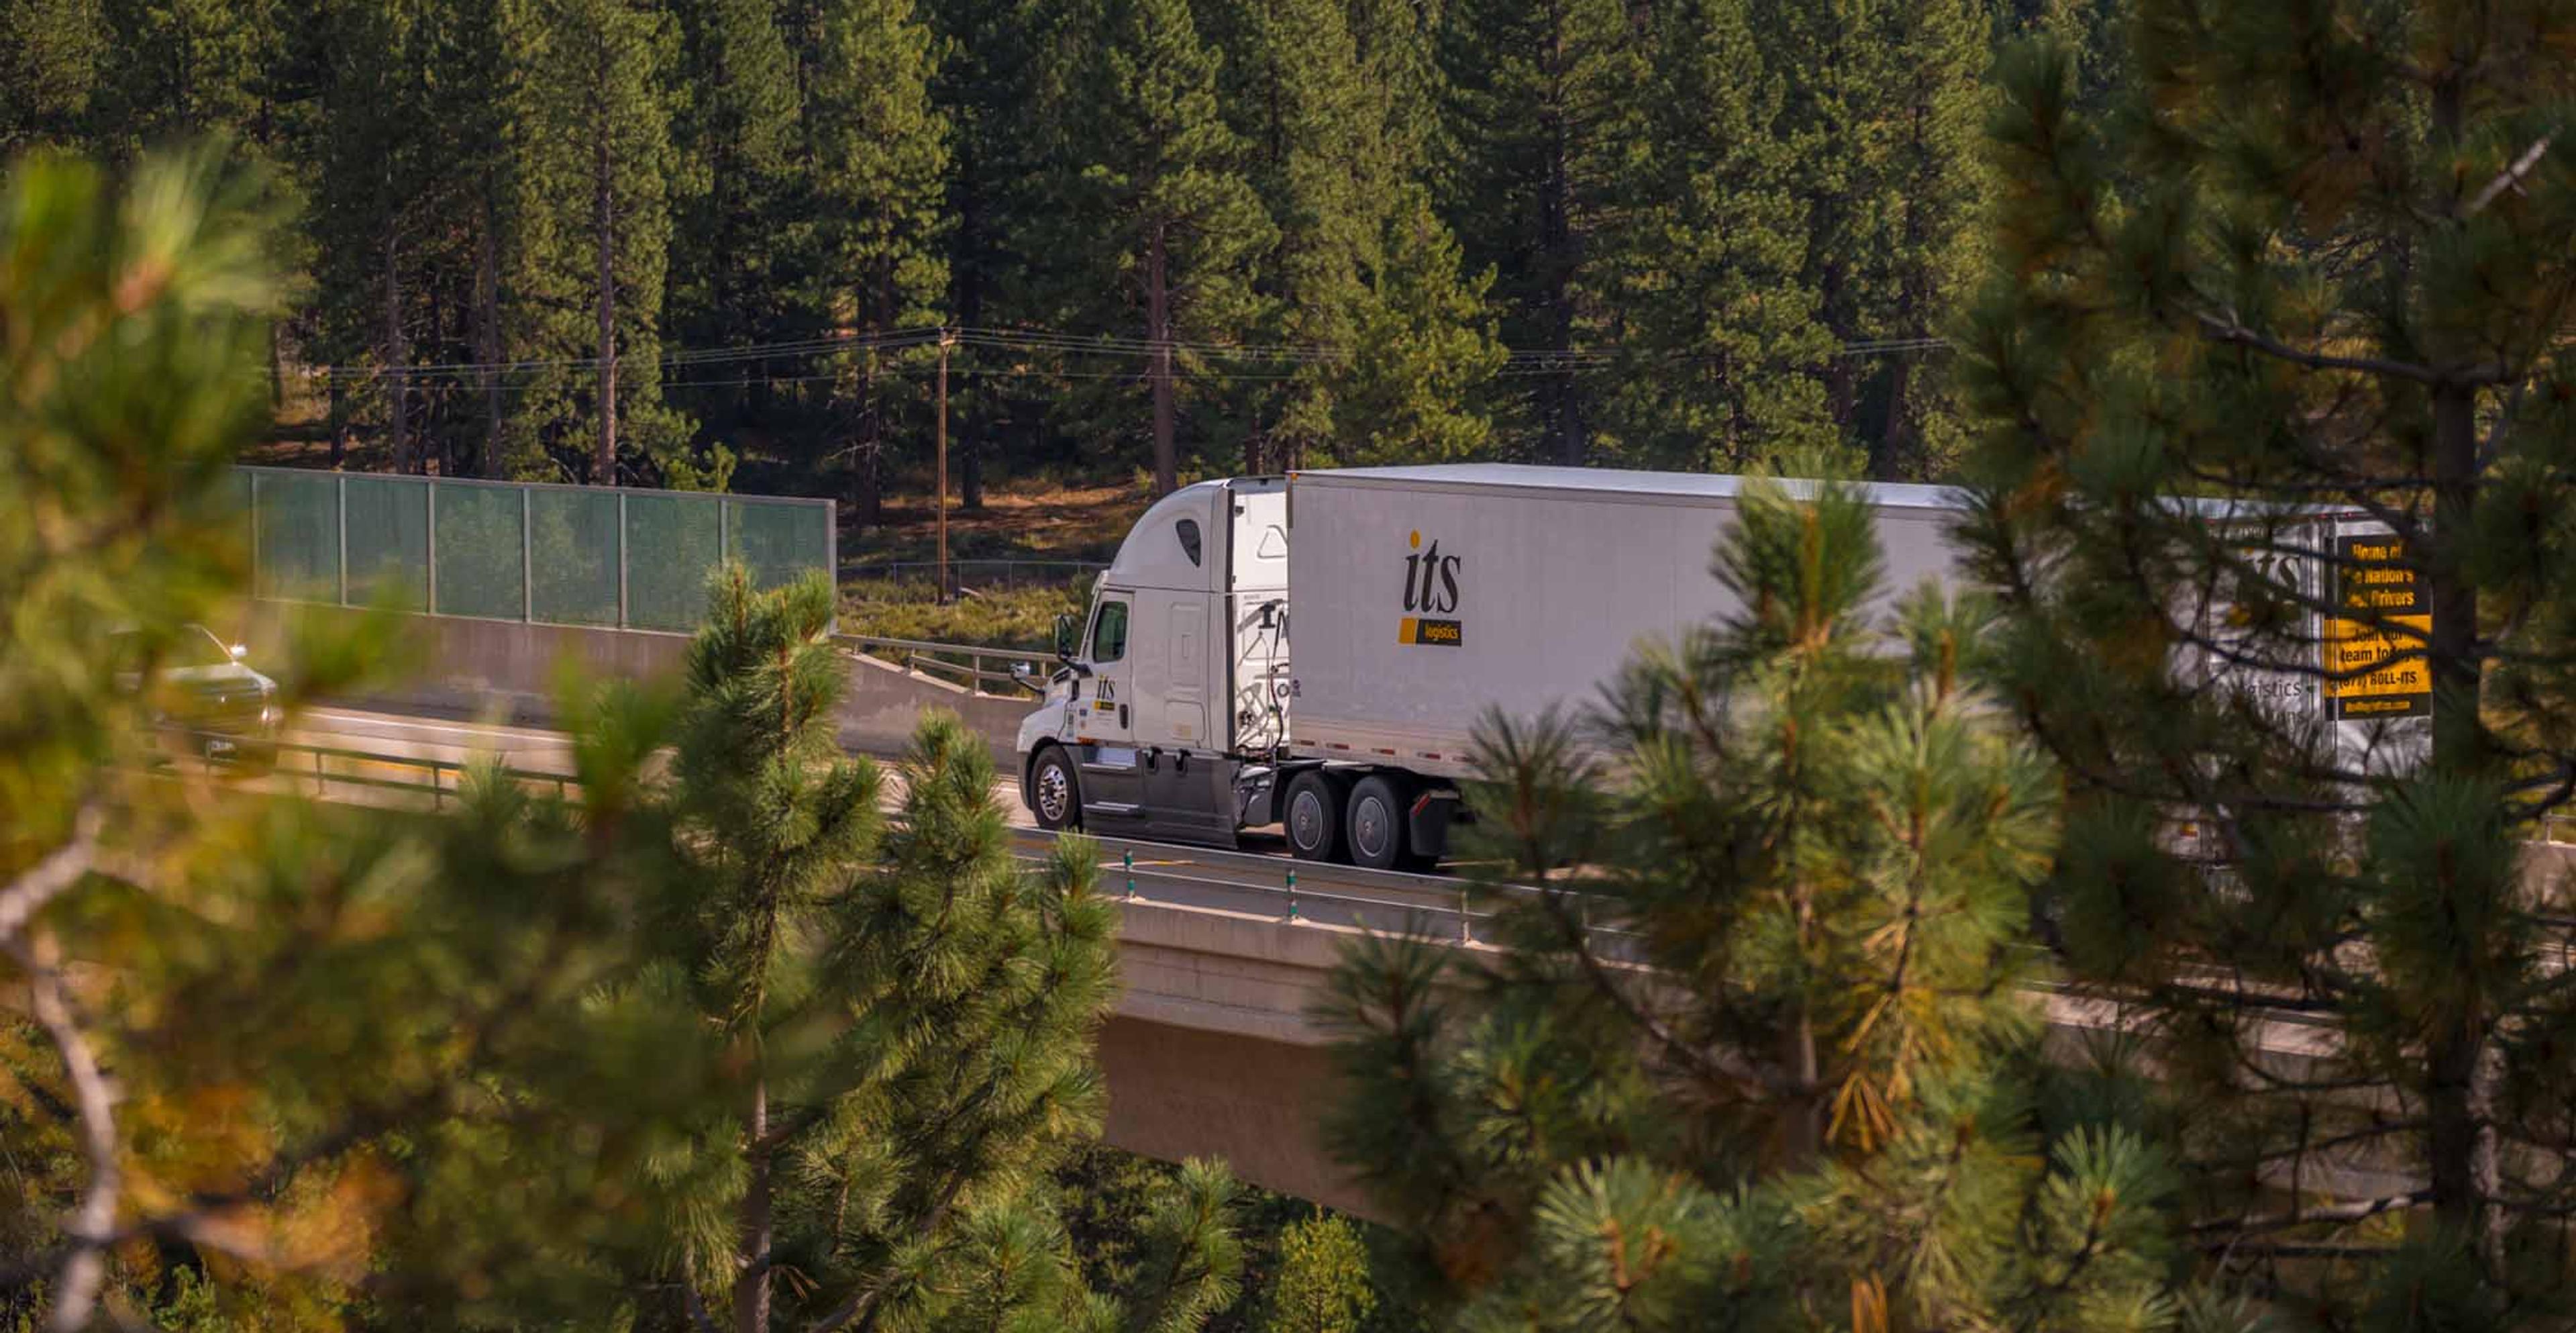 ITS truck driving on the freeway surrounded by lots of trees